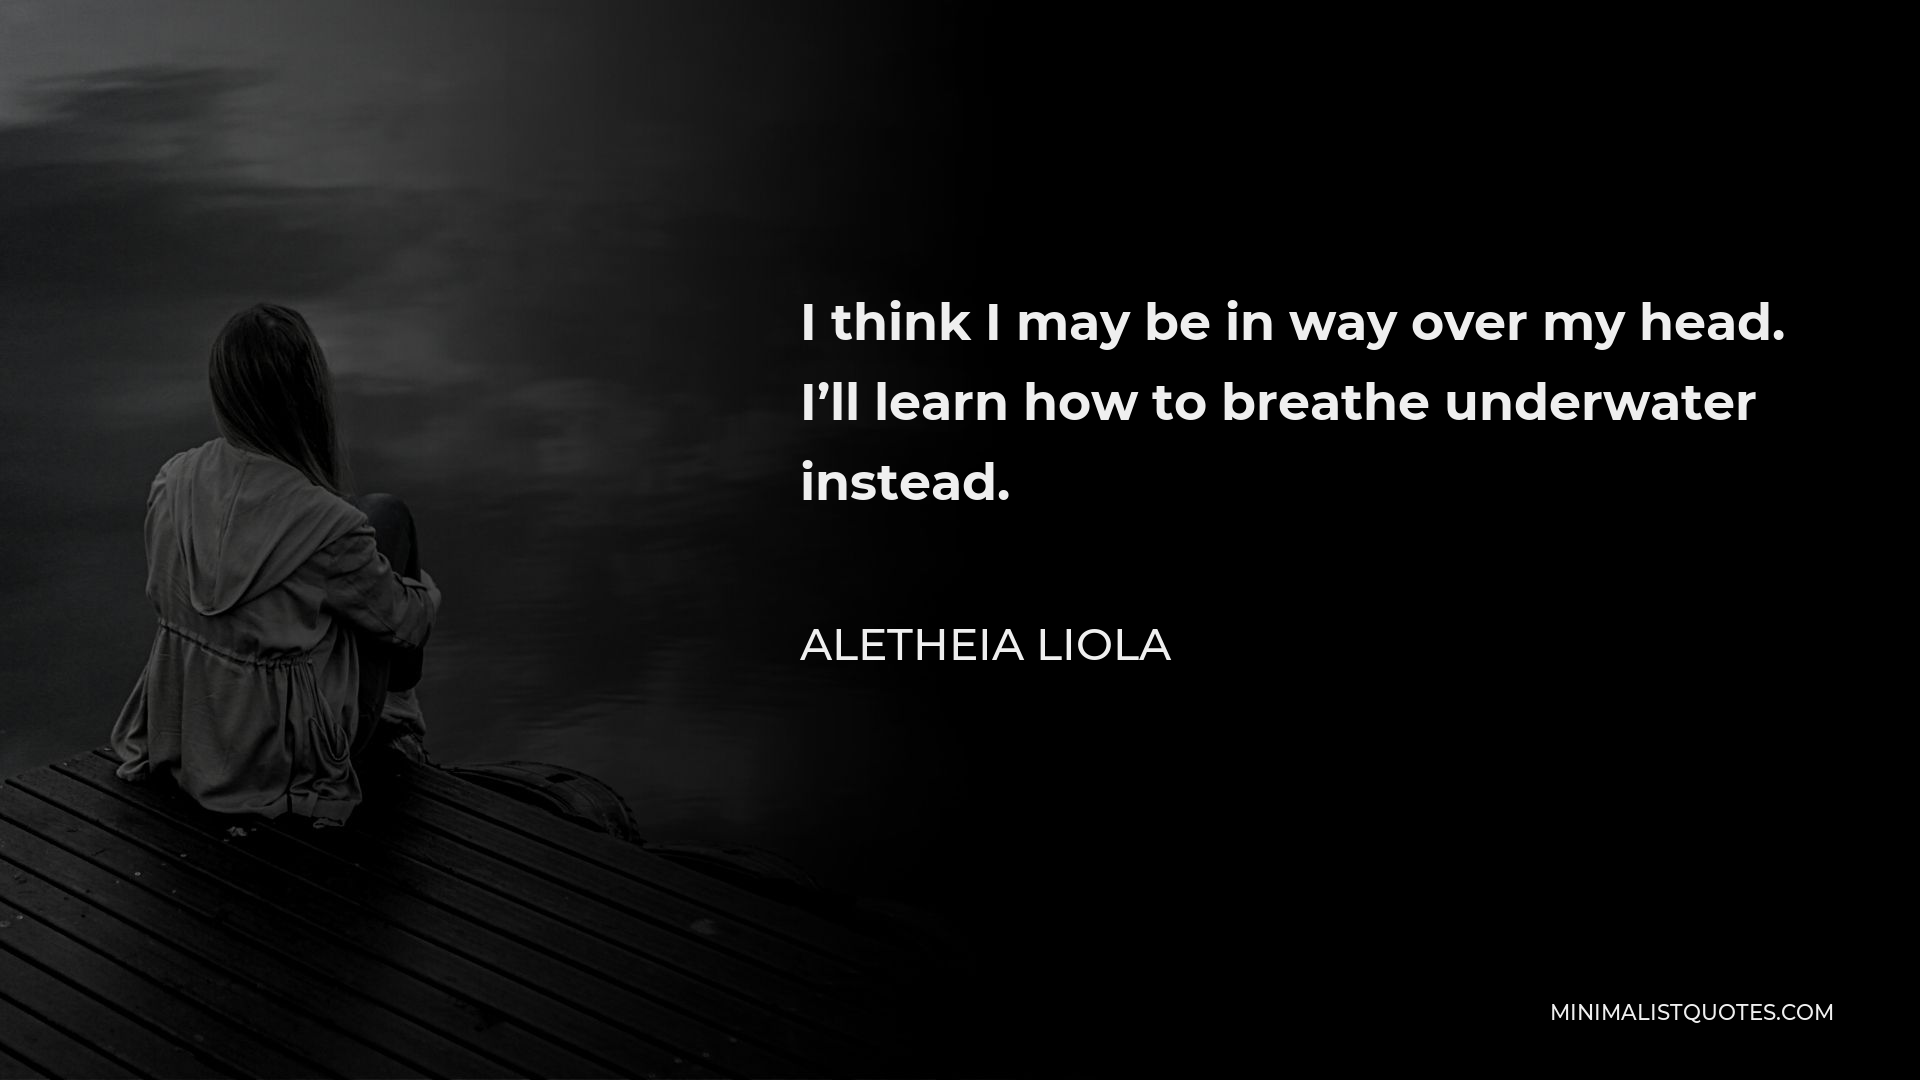 Aletheia Liola Quote - I think I may be in way over my head. I’ll learn how to breathe underwater instead.